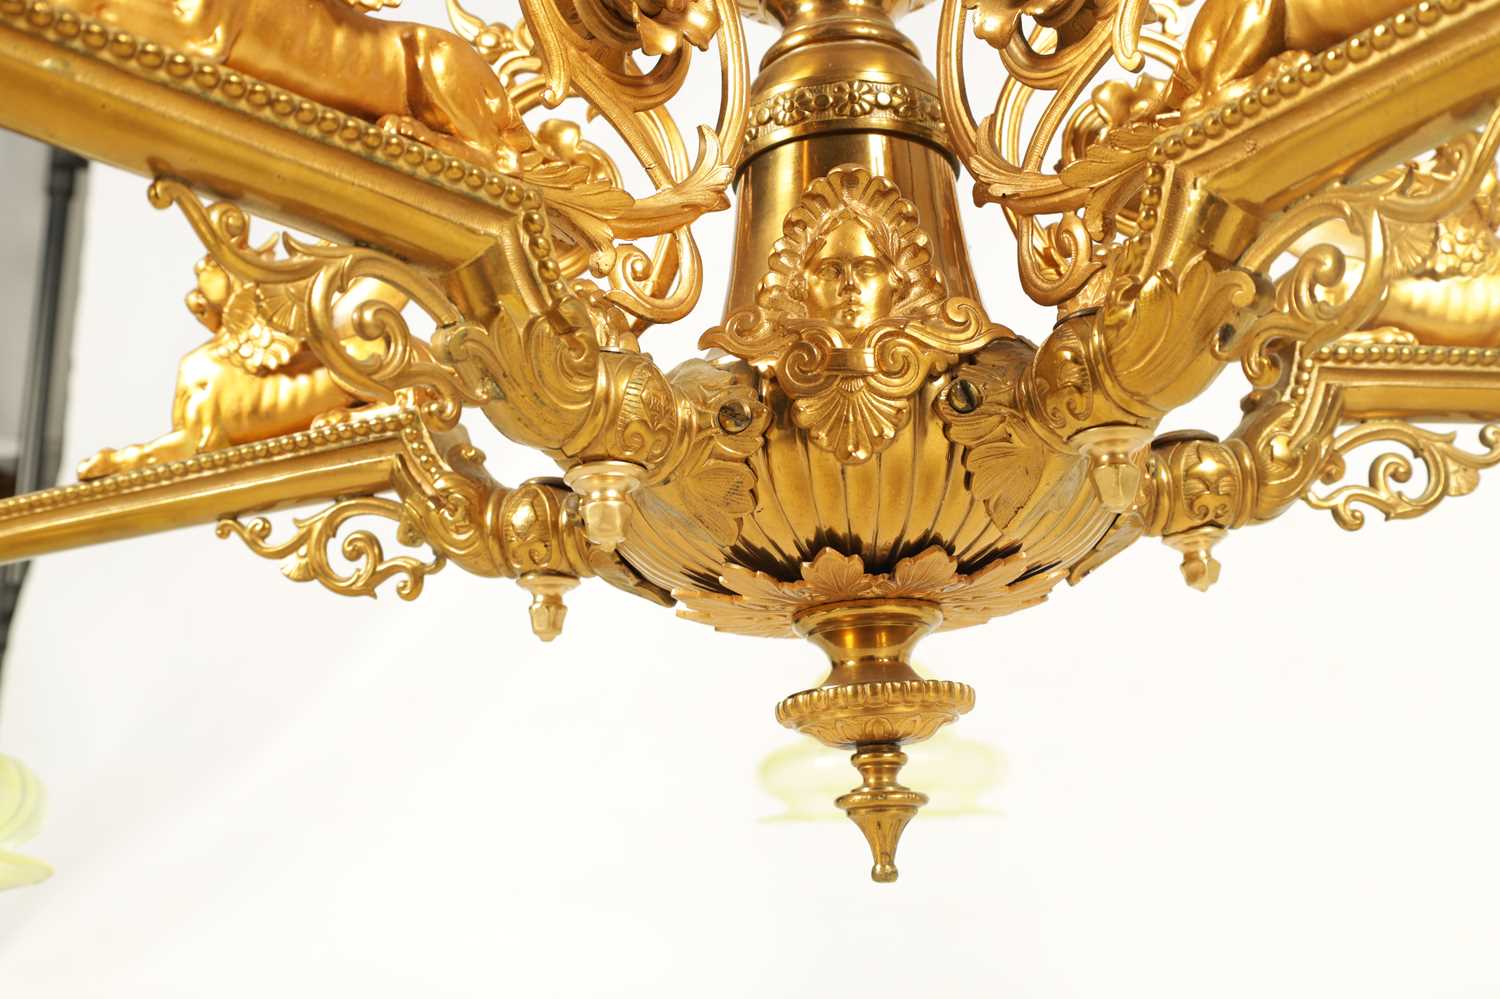 AN IMPRESSIVE LATE 19TH CENTURY GILT BRASS HANGING EGYPTIAN REVIAL FIVE BRANCH LIGHT FITTING - Image 5 of 9